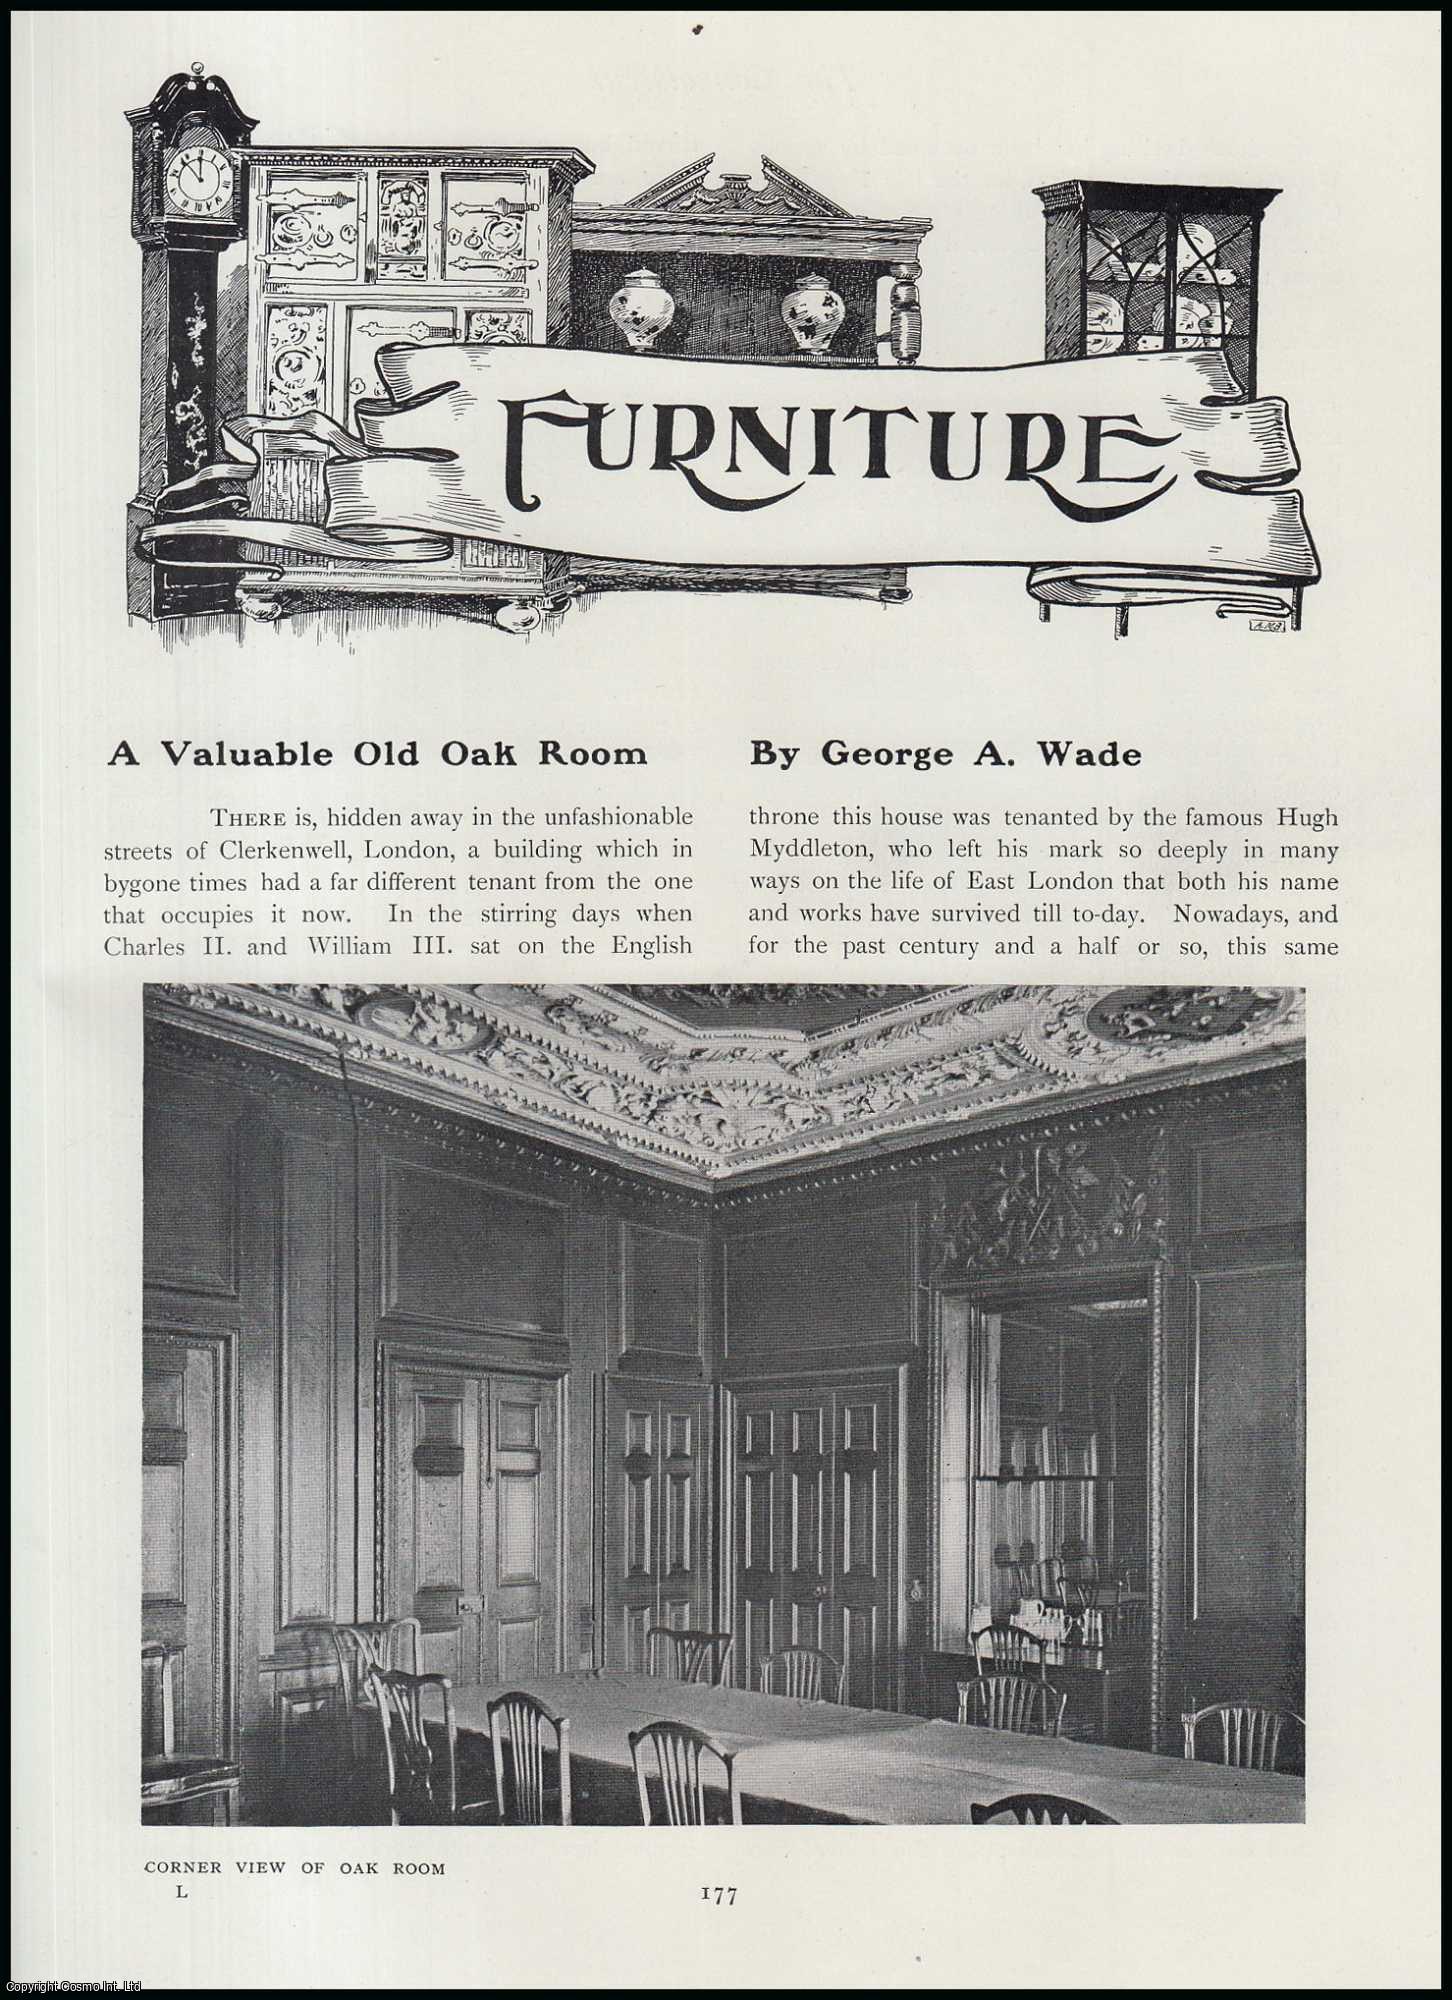 George A. Wade - A Valuable Old Oak Room at a Clerkenwell House in London, which was Tenanted by The Famous Hugh Myddleton. An original article from The Connoisseur, 1907.